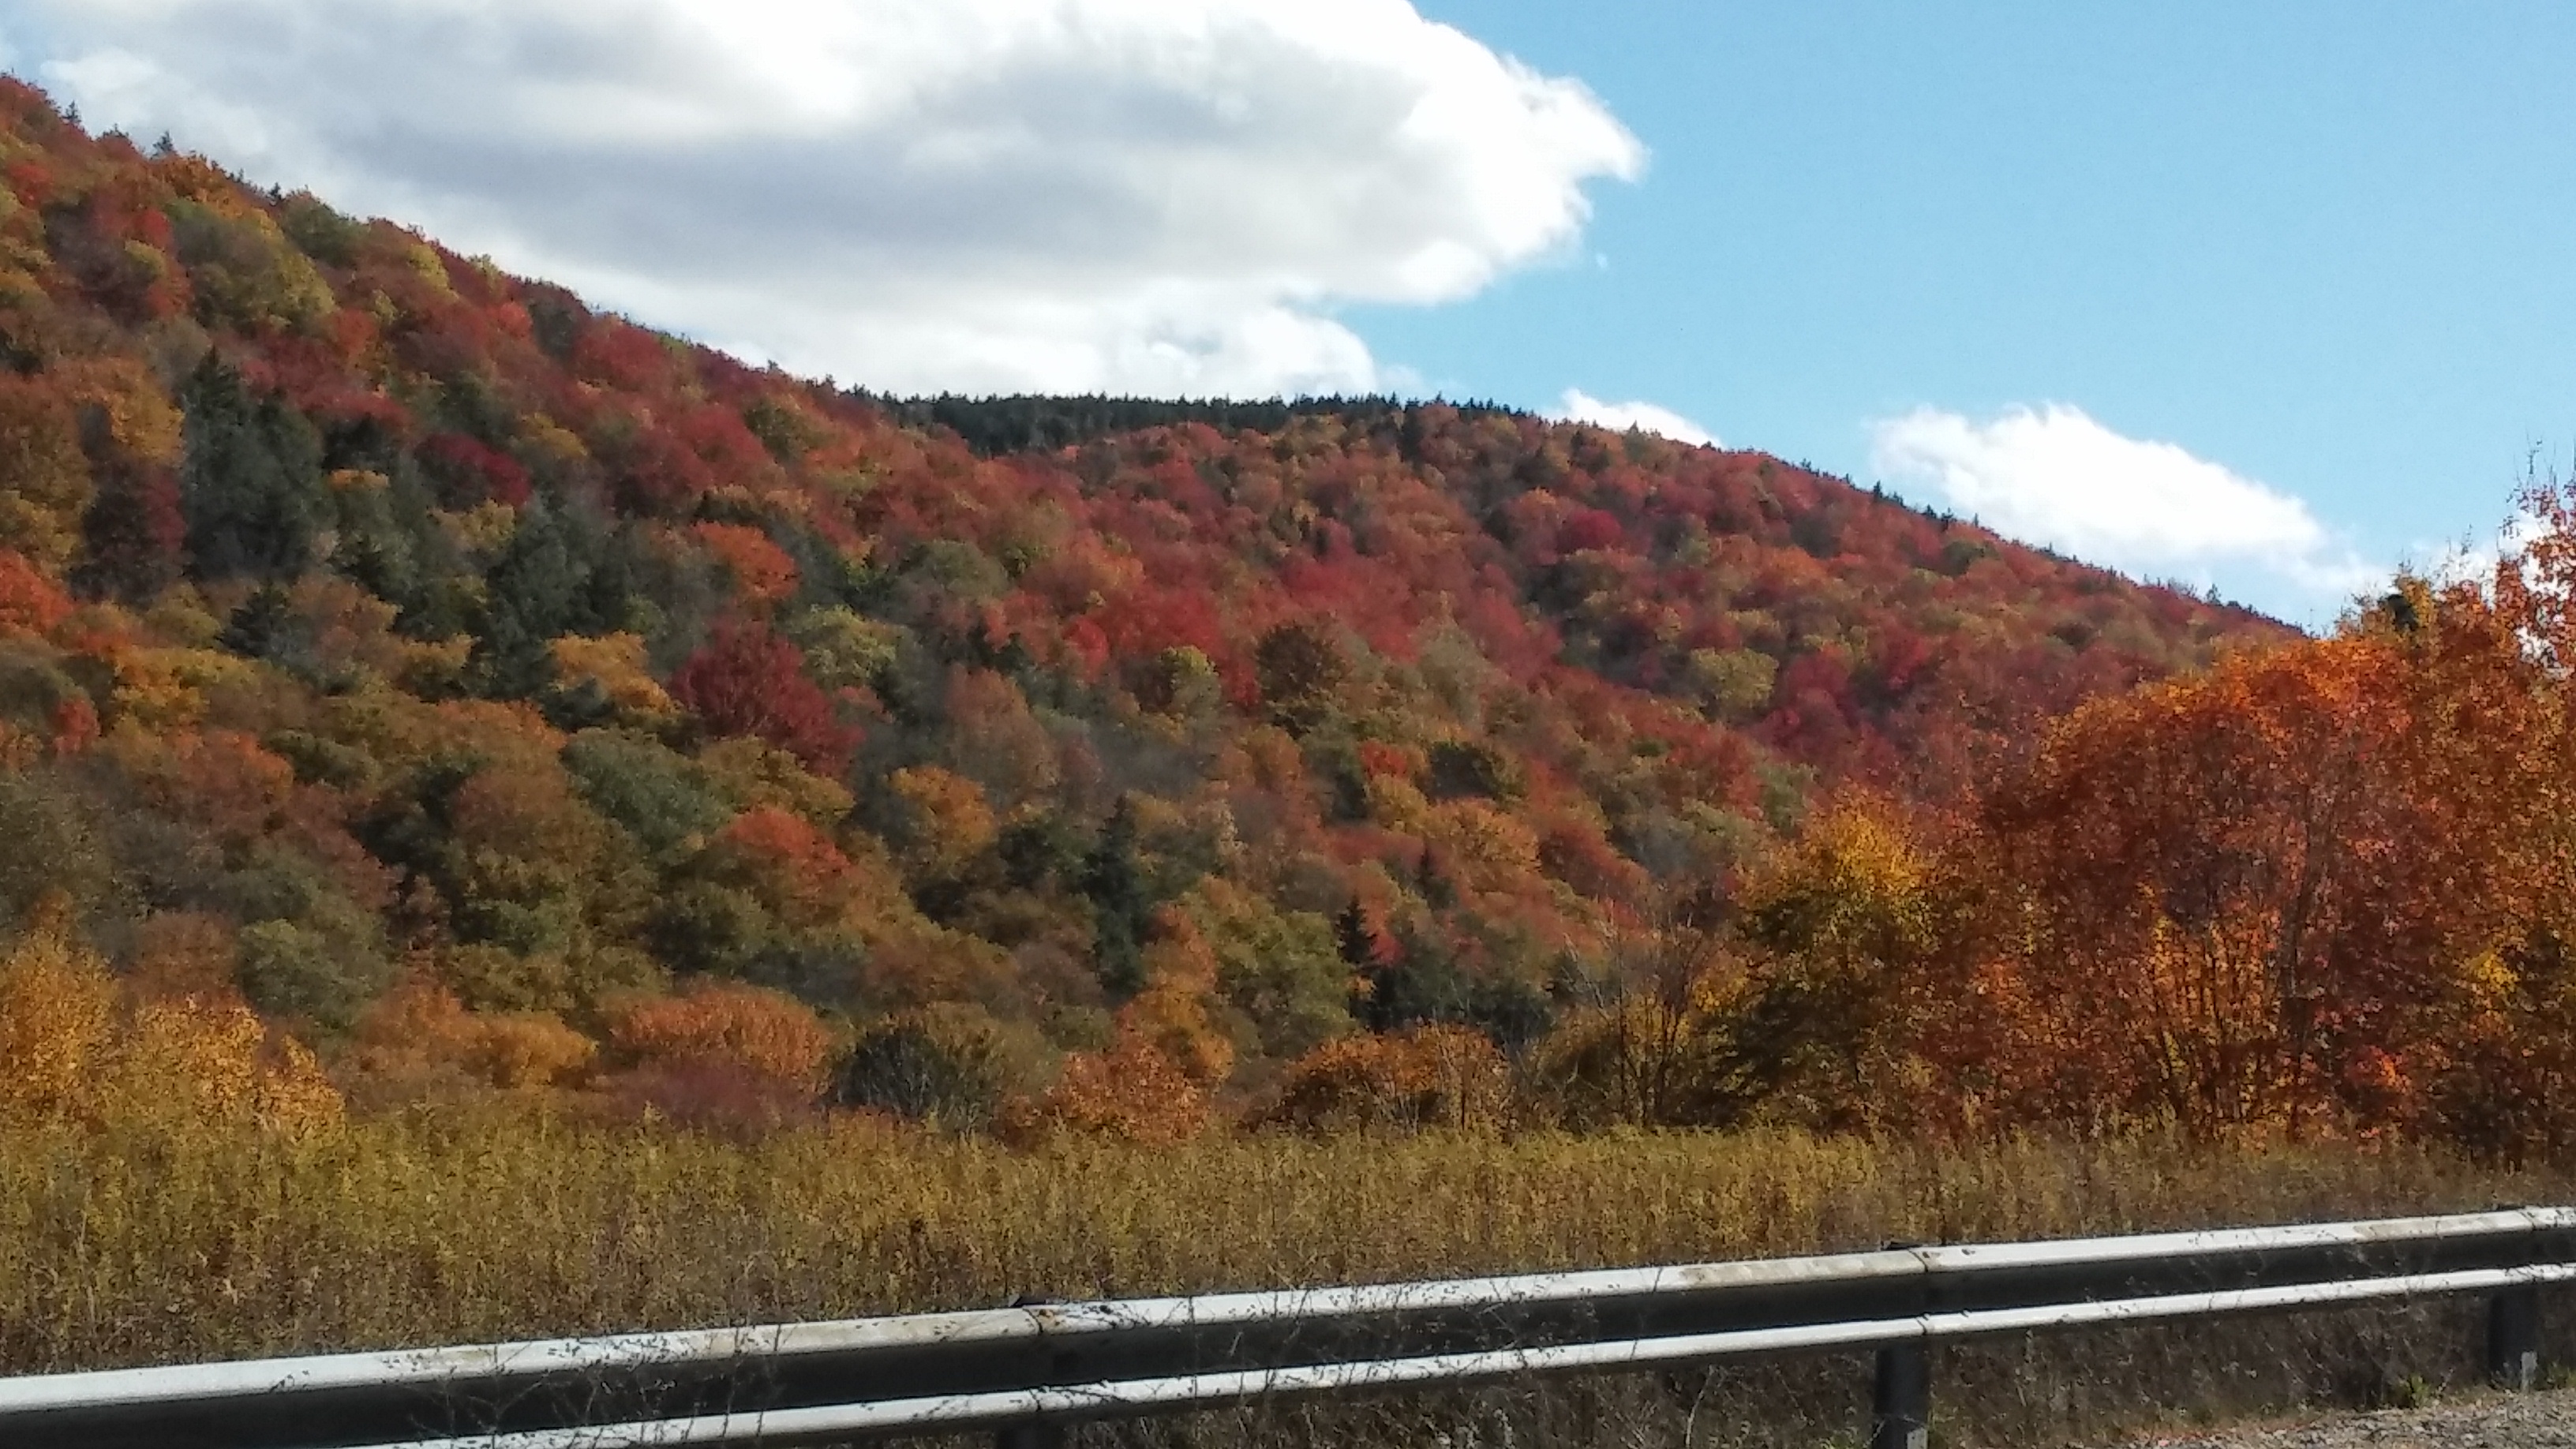 Viet from the scenic highway of the Monongahela National Forest in West Virgina, showing a mix of American wood species in the fall. Photo: Randy Coots